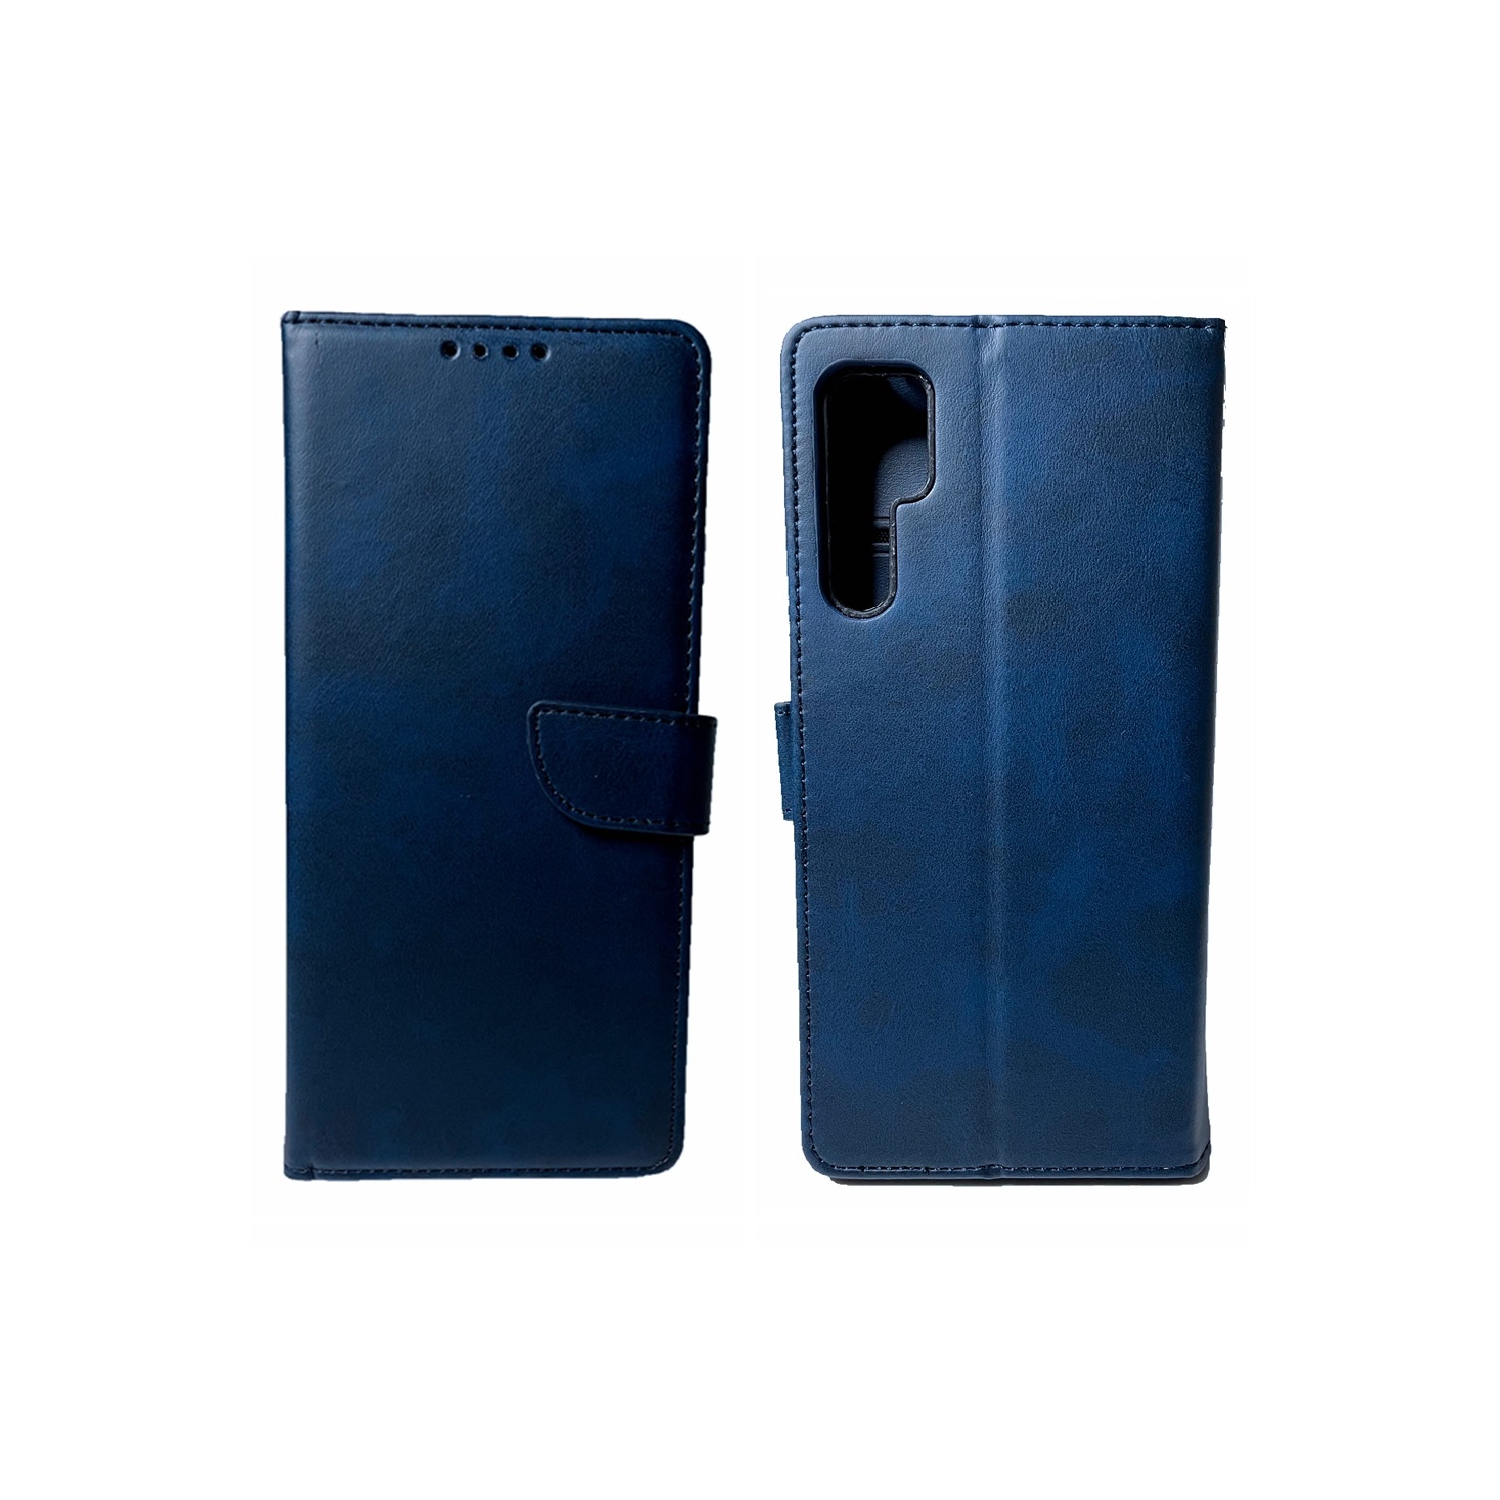 TopSave Leather Folio Flip Wallet w/Magnetic Clip Card Slot Holder Case For TCL 20 Pro, Navy Blue